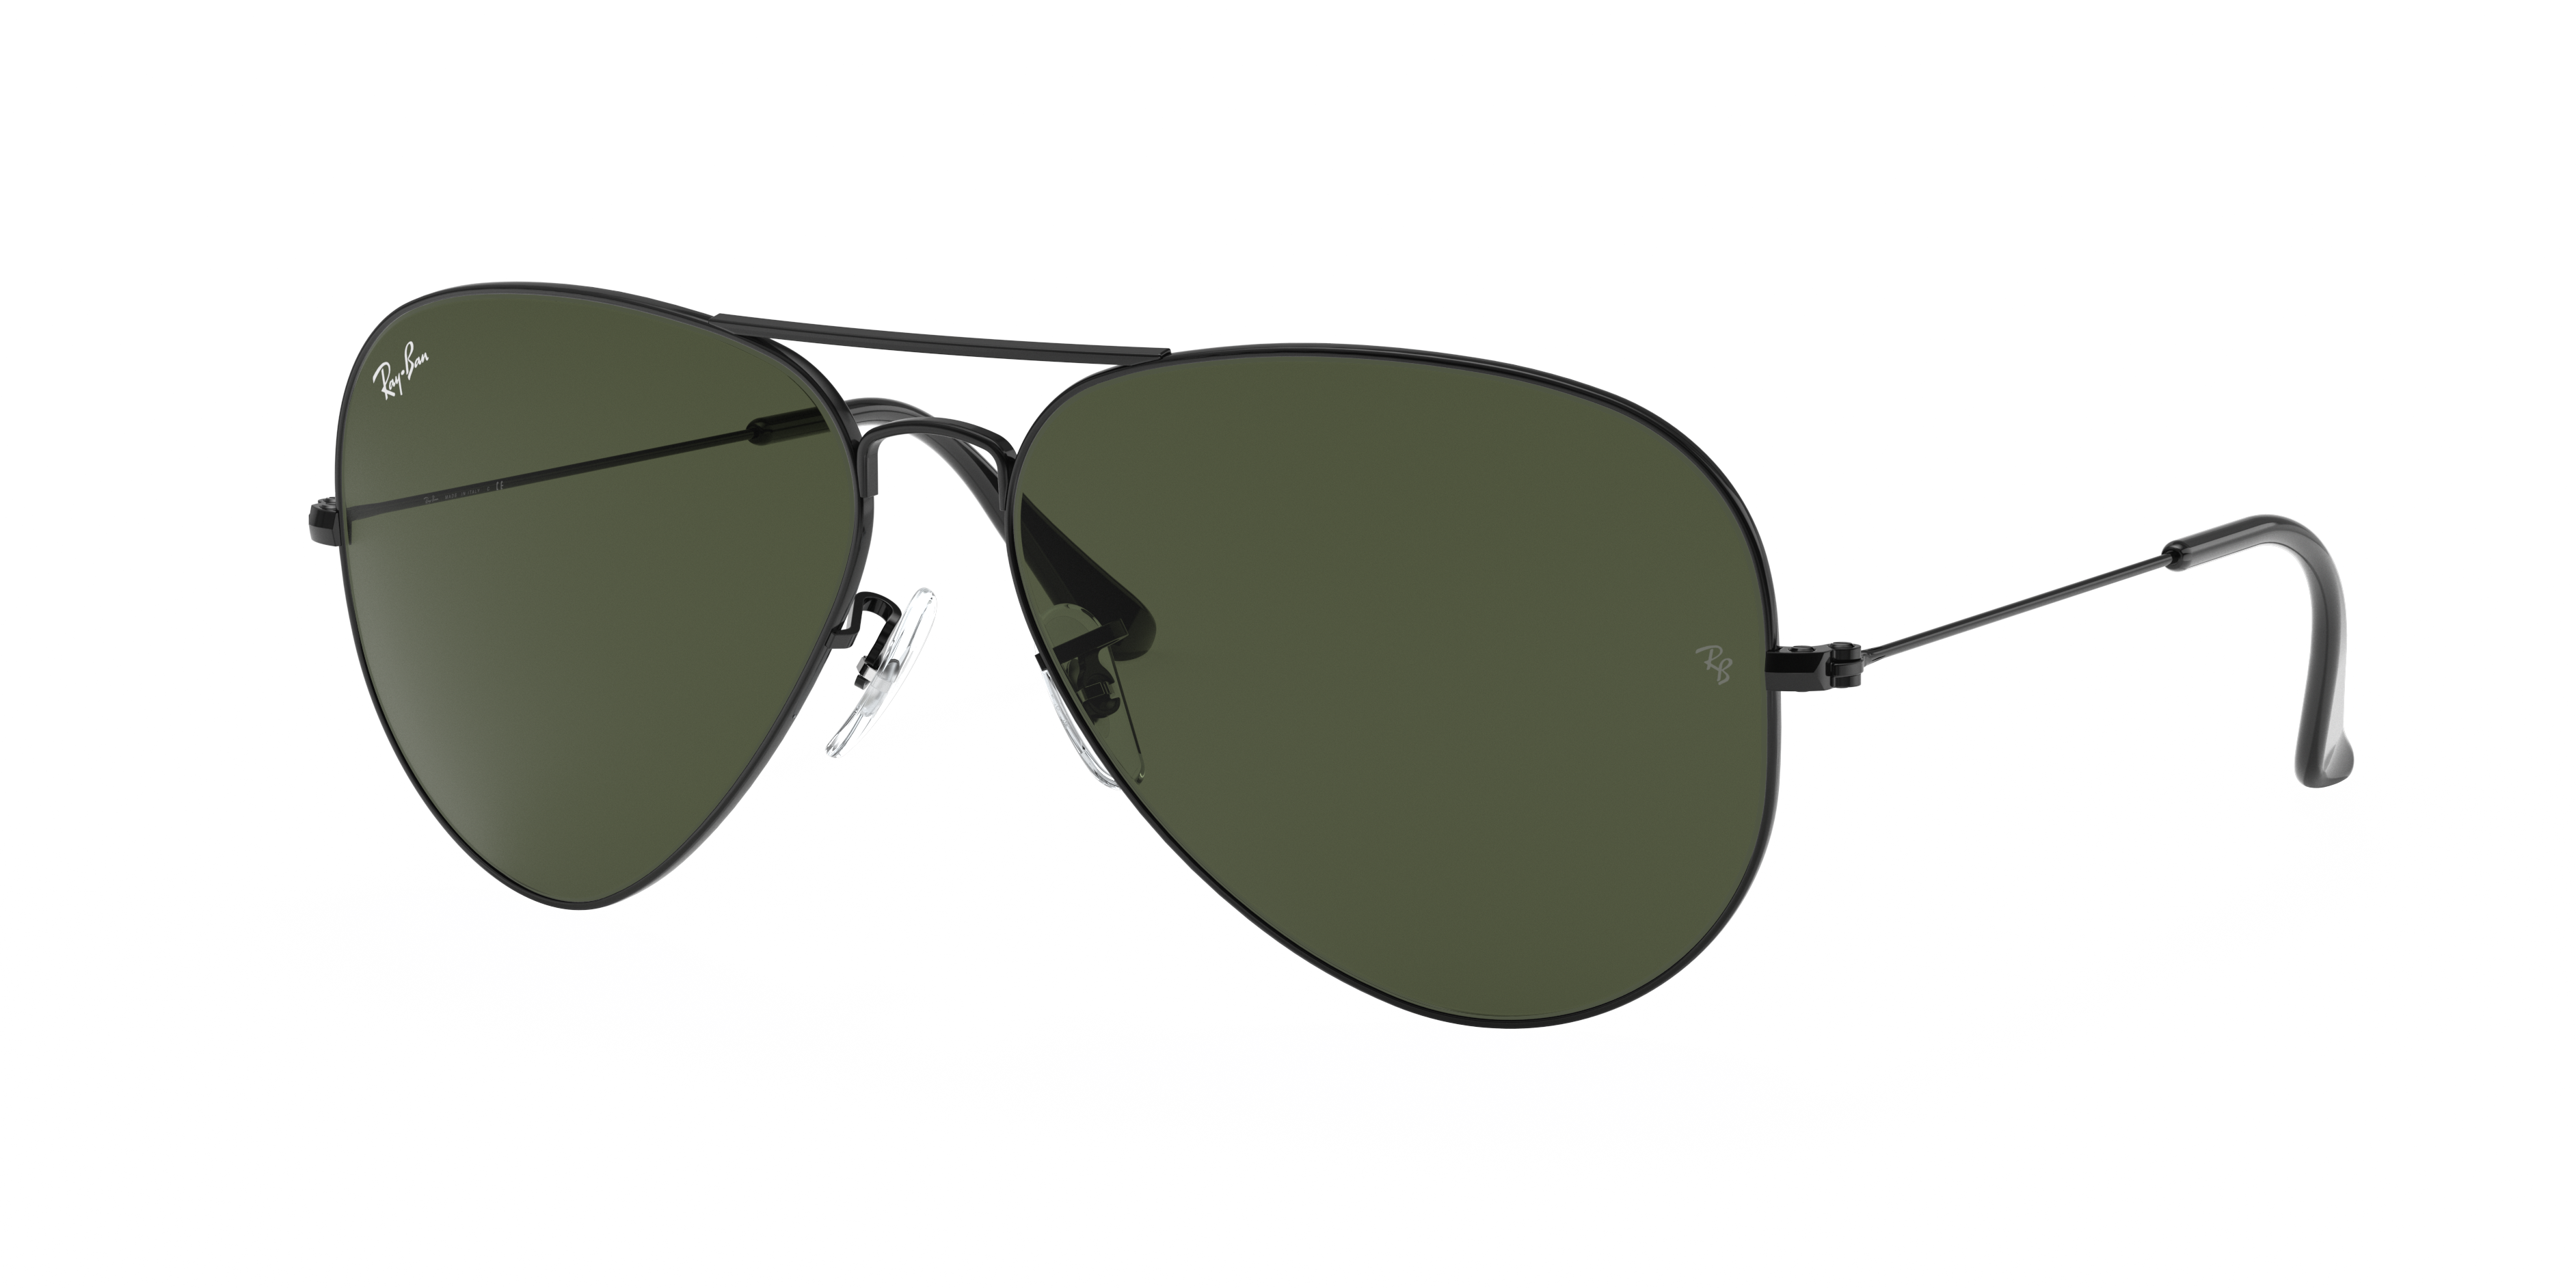 Check out the Aviator Large Metal Ii at ray-ban.com